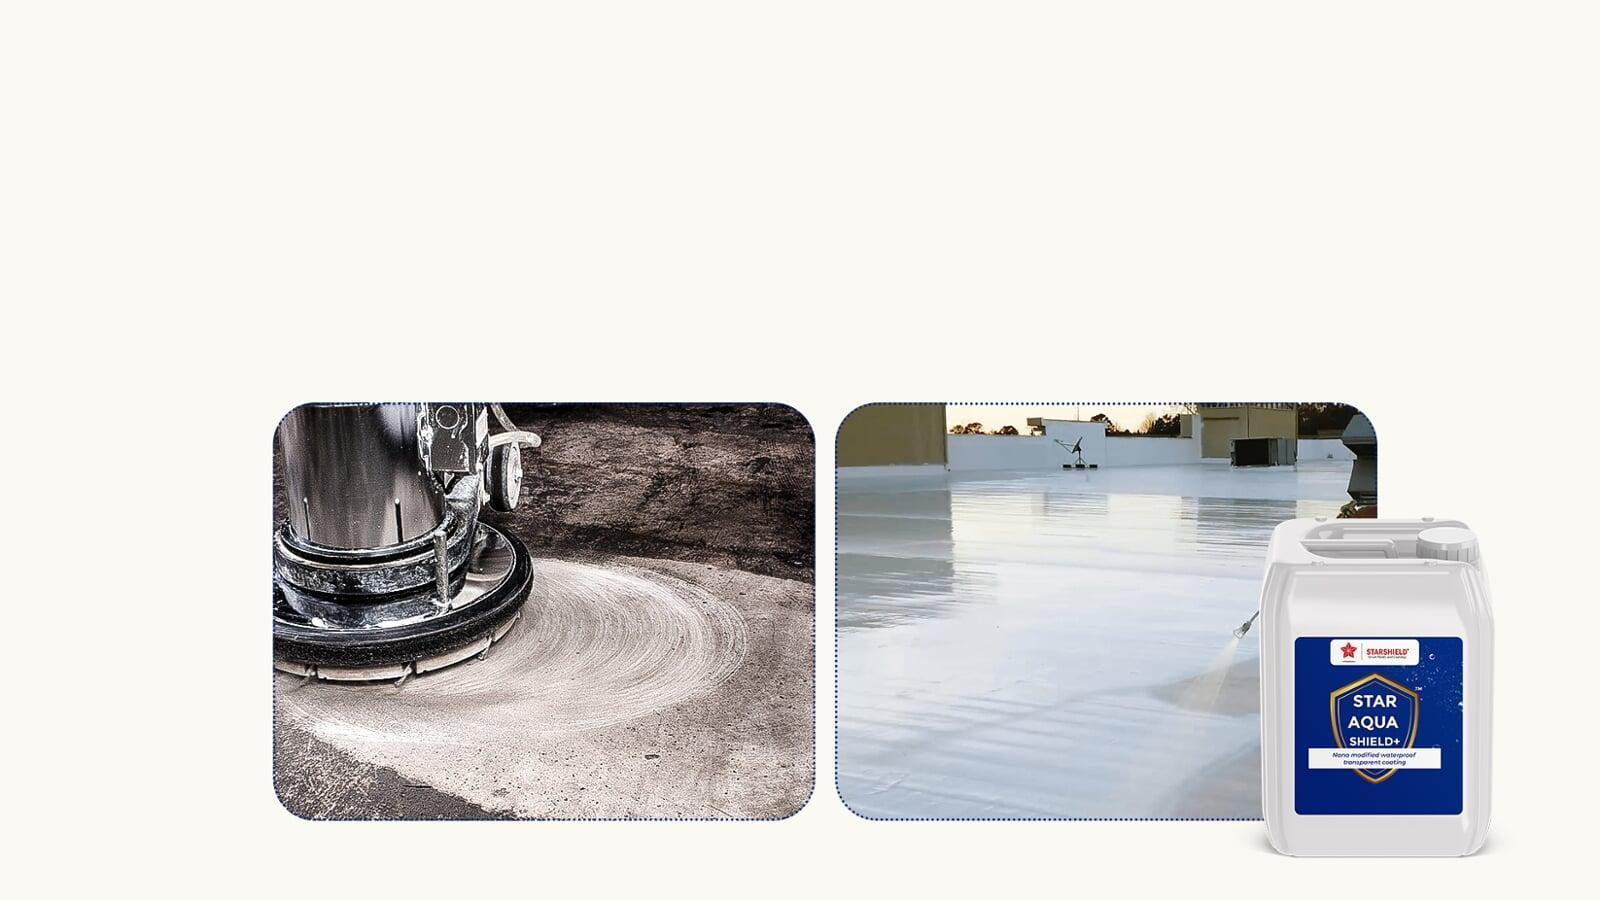 Protect surfaces with Star Aqua Shield +: Advanced elastomeric waterproofing coating. Heat reduction and durability assured.